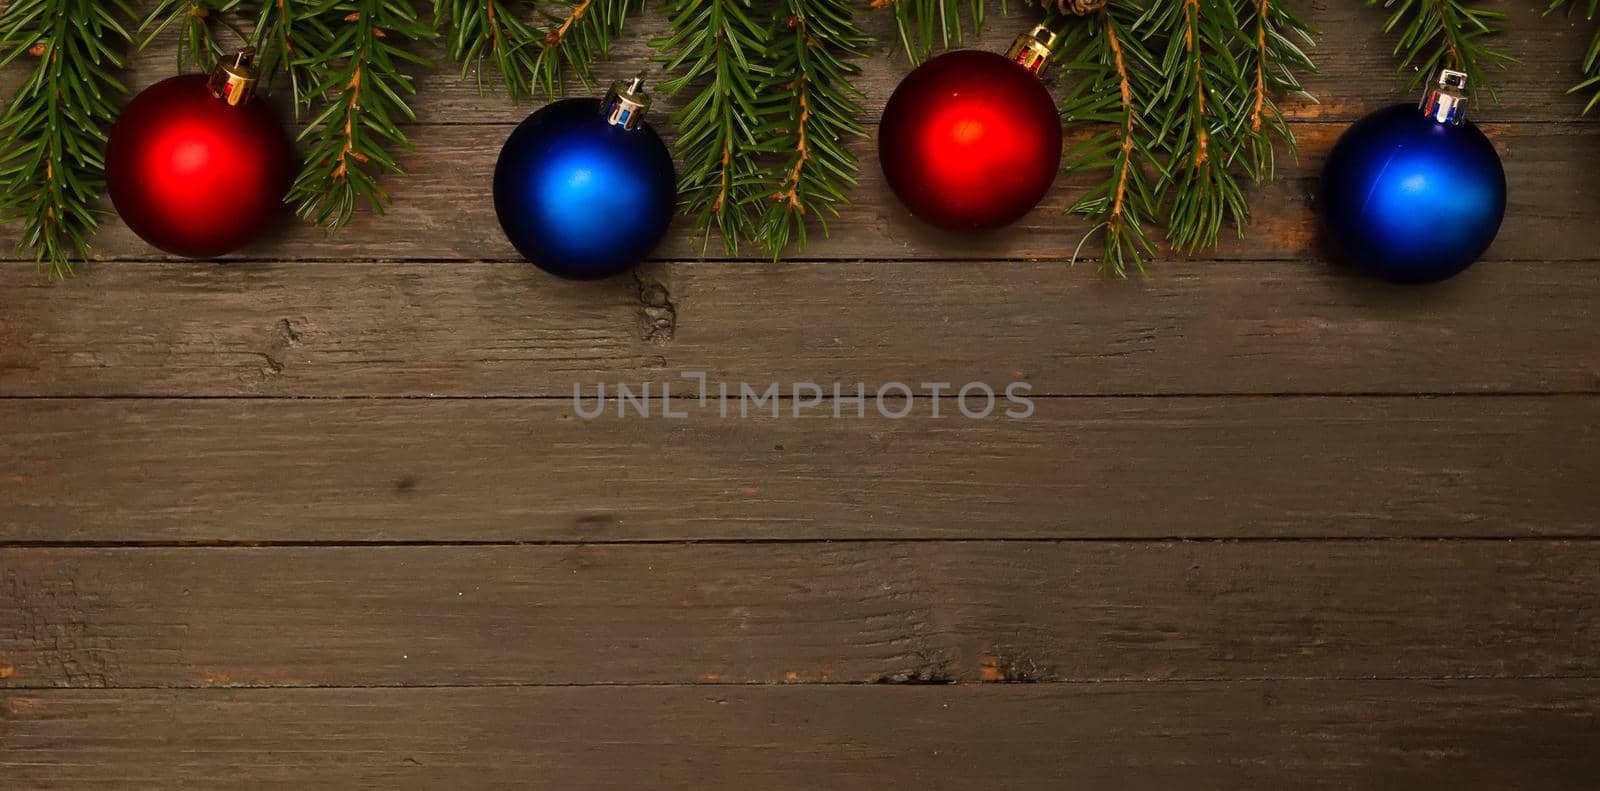 Christmas background.Two red christmas balls,two blue balls and fir tree branches on wooden background.